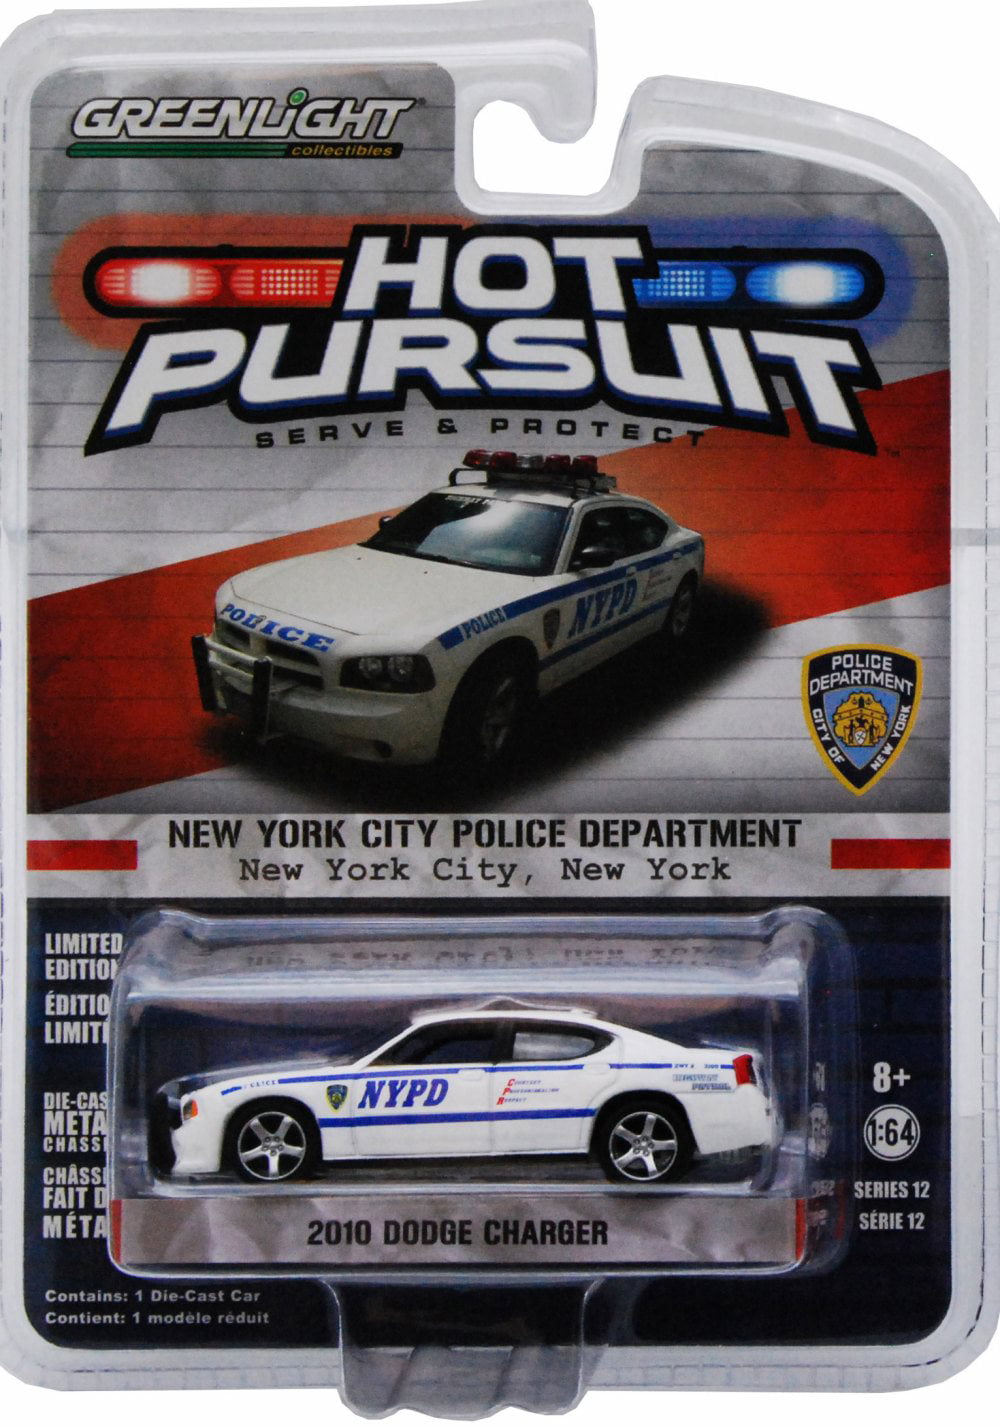 OH POLICE CAR 1:64 SCALE DIECAST MODEL CAR 2009 09 DODGE CHARGER WILMINGTON 